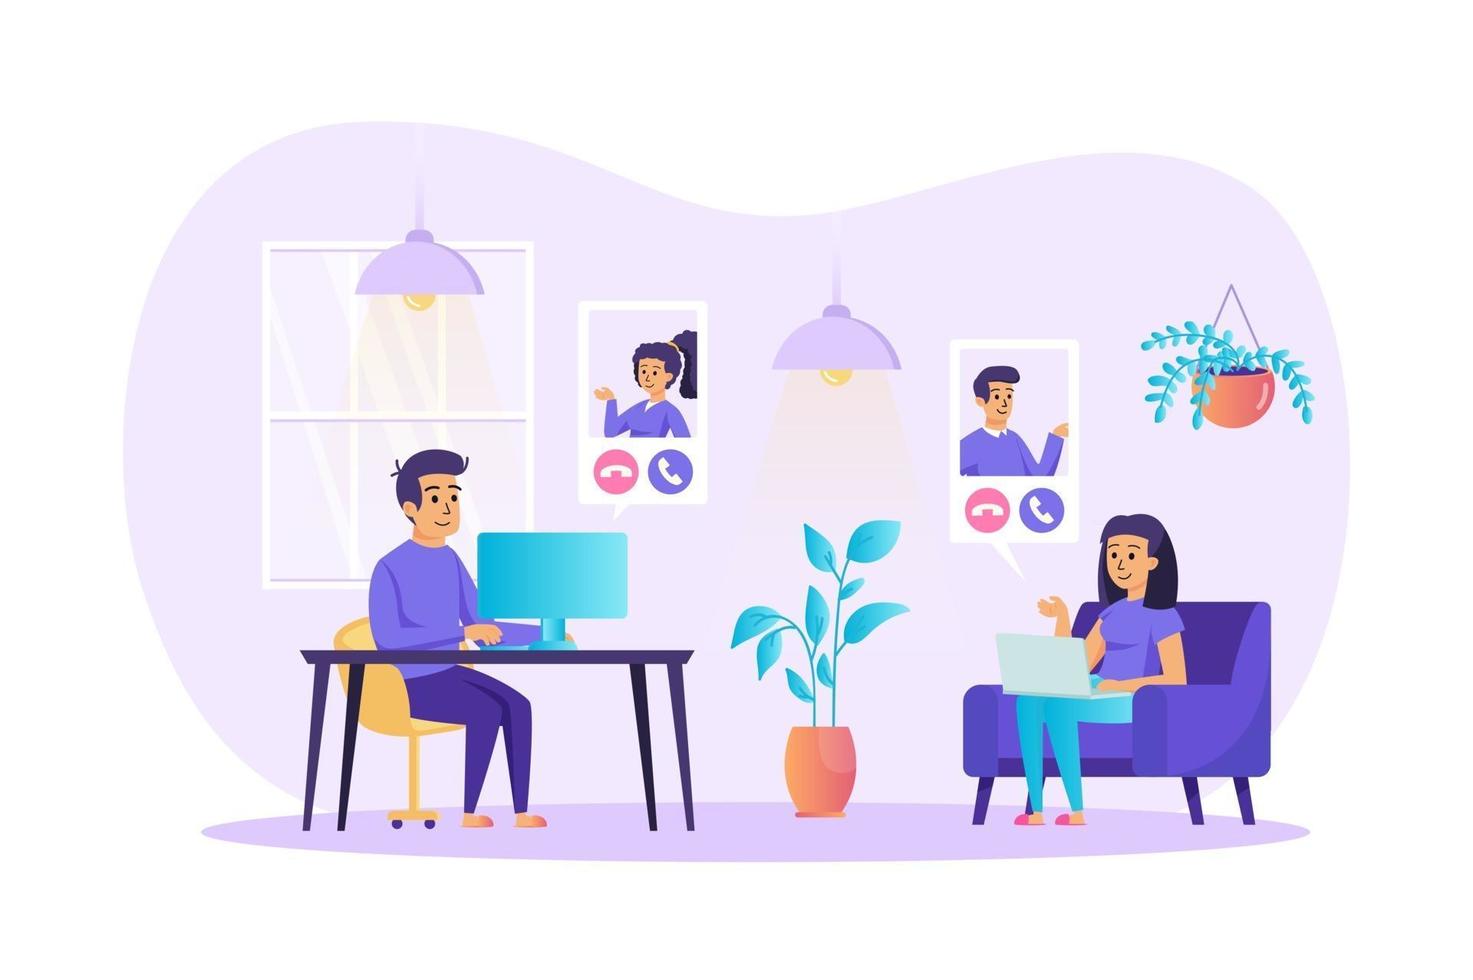 Video conference concept vector illustration of people characters in flat design